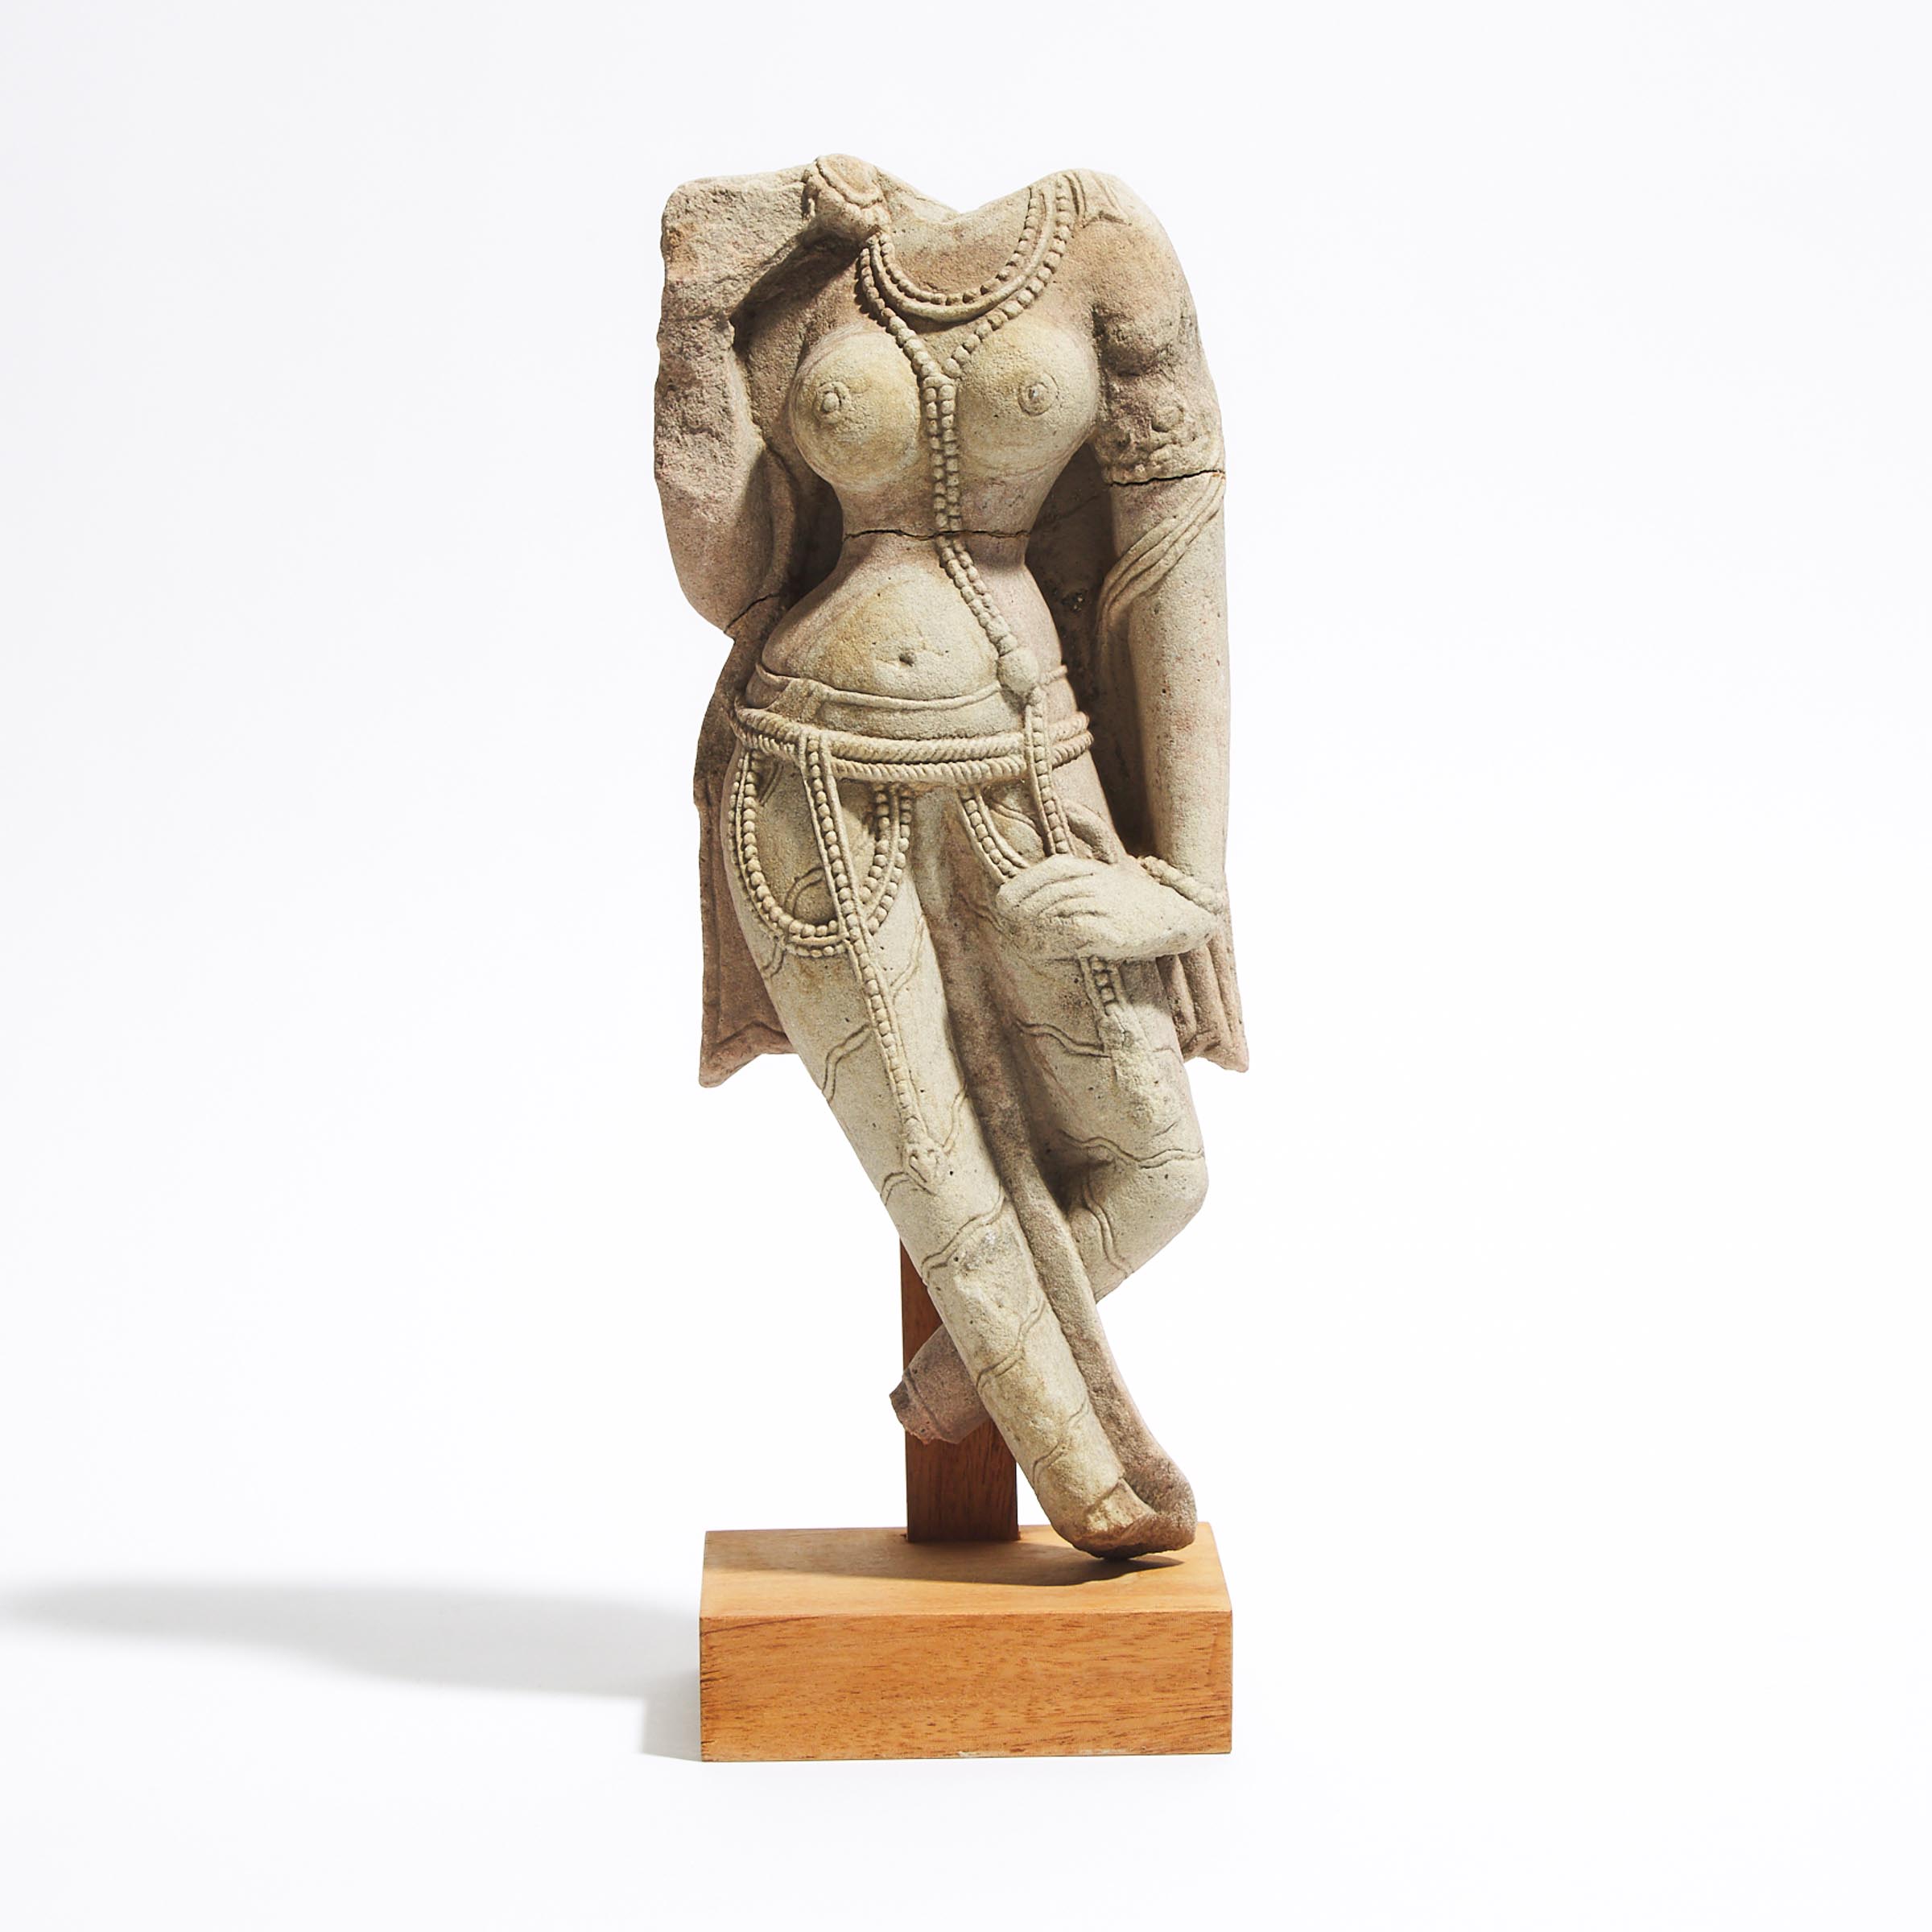 A Limestone Torso of a Goddess, India, 12th Century or Later